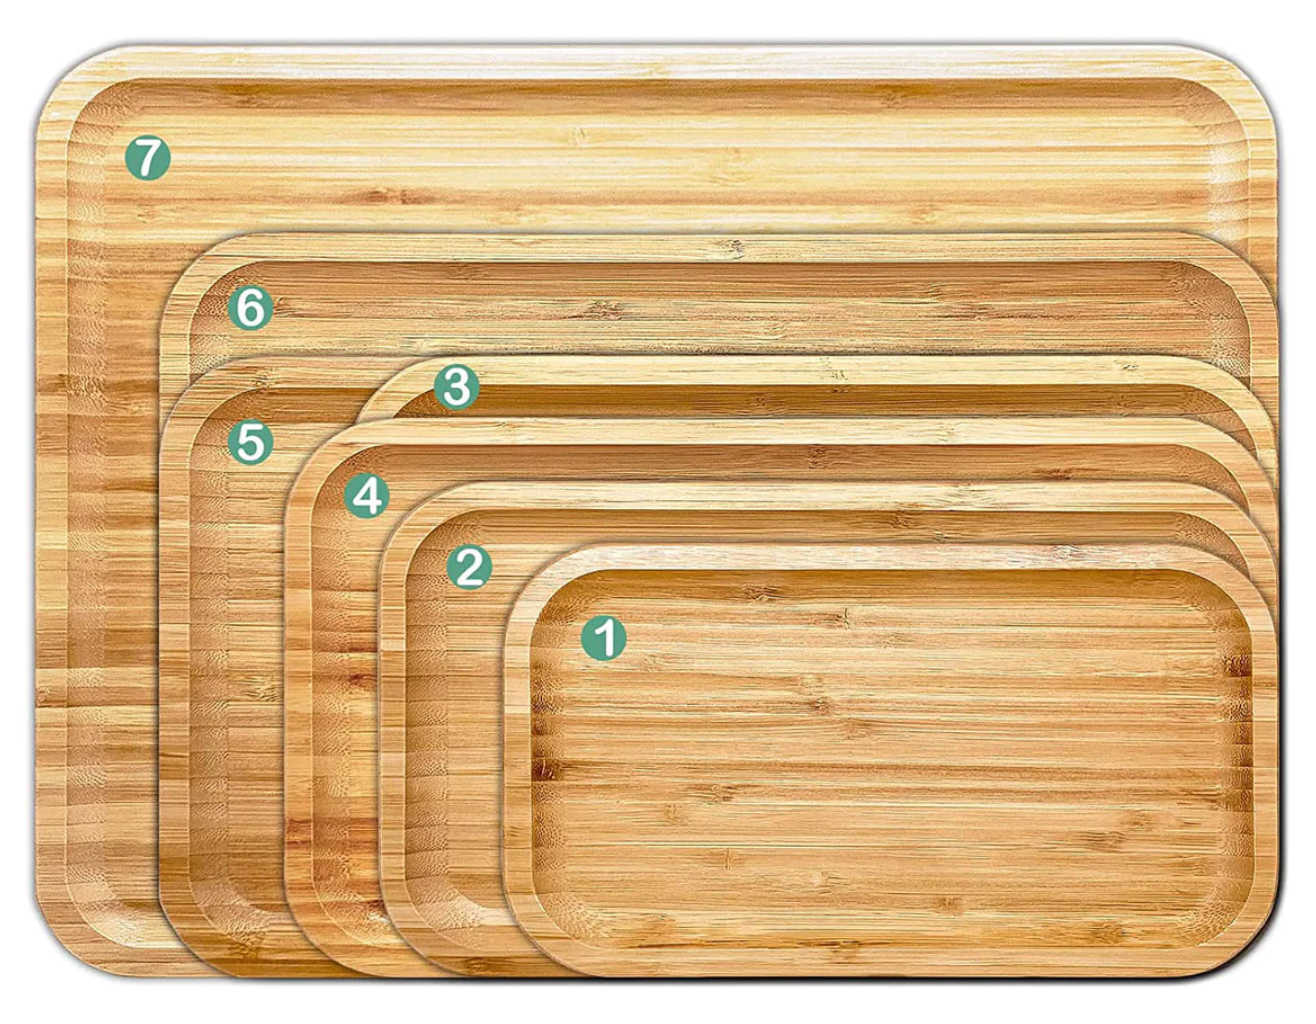 [ Heim Concept ] Premium Organic Bamboo Extra Large Cutting Board and Serving Tray